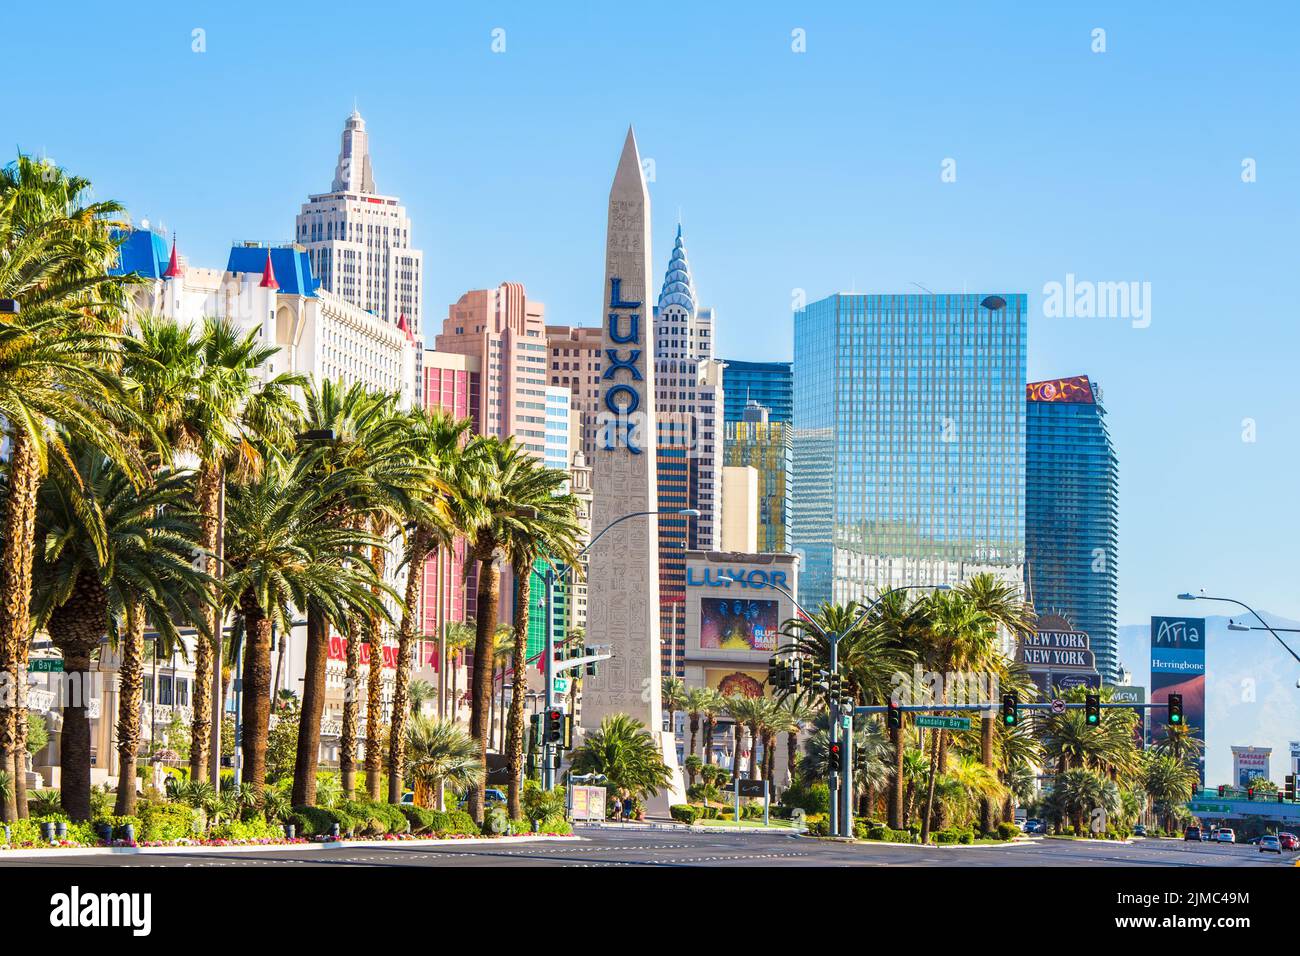 Las Vegas, Nevada - May 16, 2018: View of hotel resort casino's along Las Vegas Boulevard also known as the Vegas Trip on a sunny day. Stock Photo